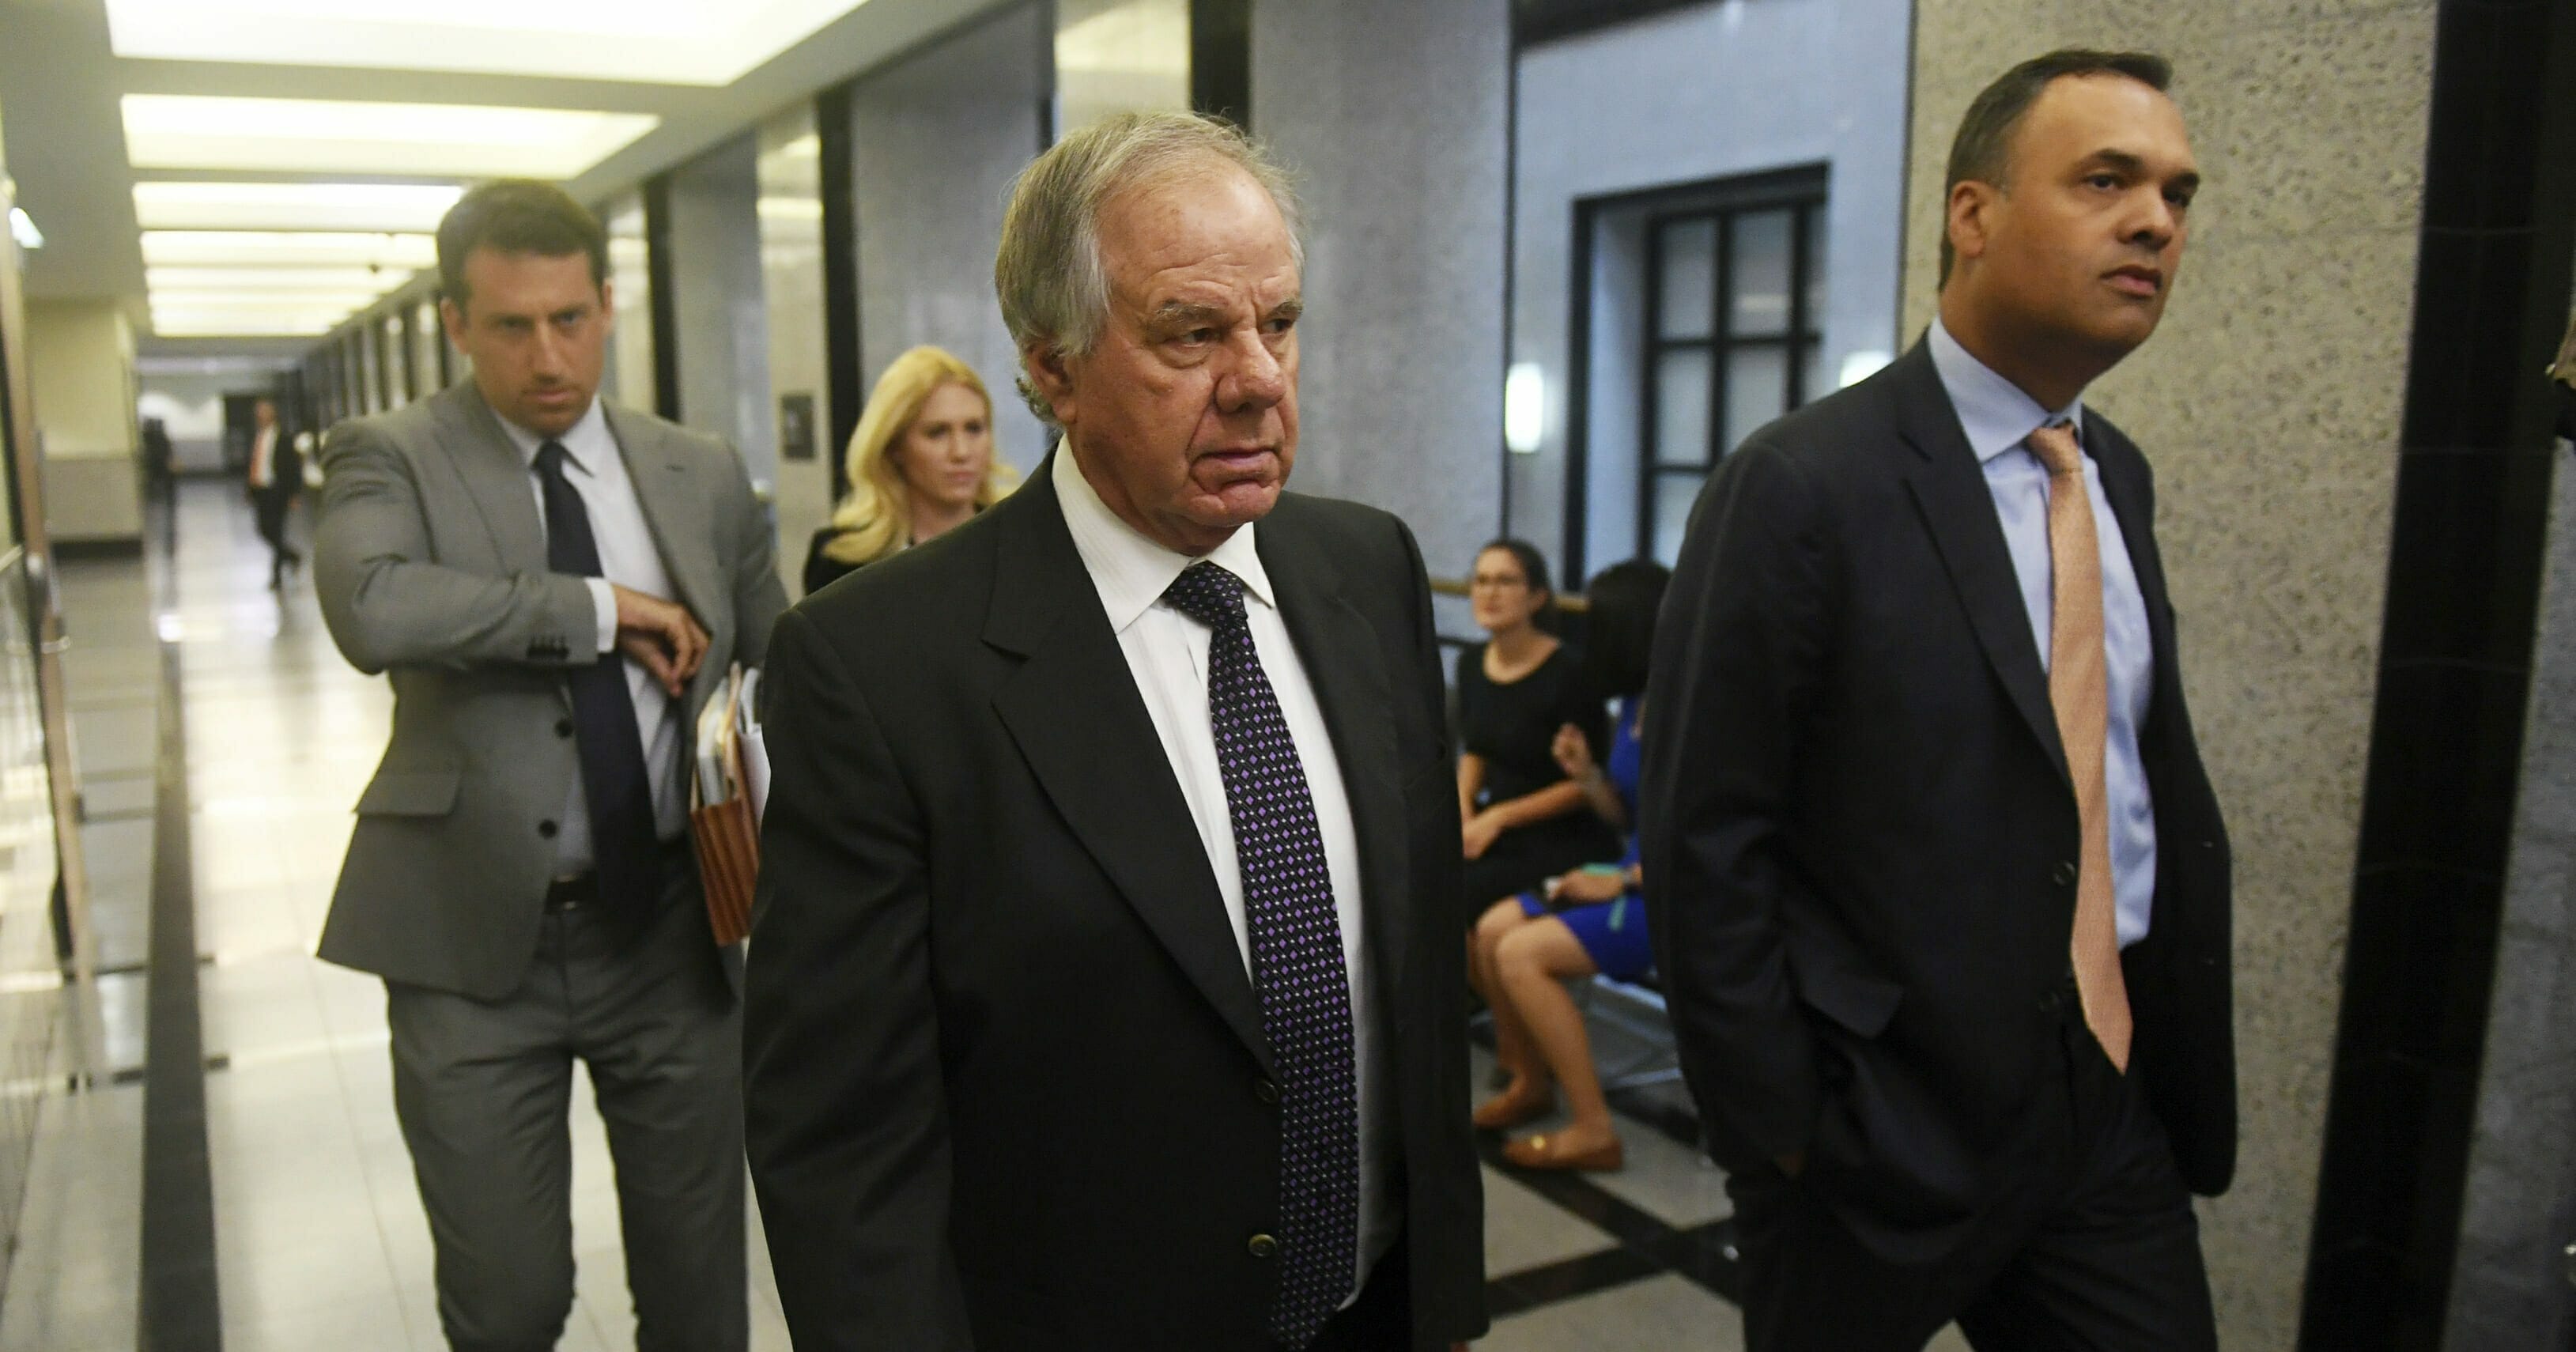 Attorneys Jack Goldberger, center, Alex Spiro, left, and William Burck, the defense team for New England Patriots owner Robert Kraft, make their way to Courtroom 2E at the Palm Beach County Courthouse, Friday, April 12, 2019.